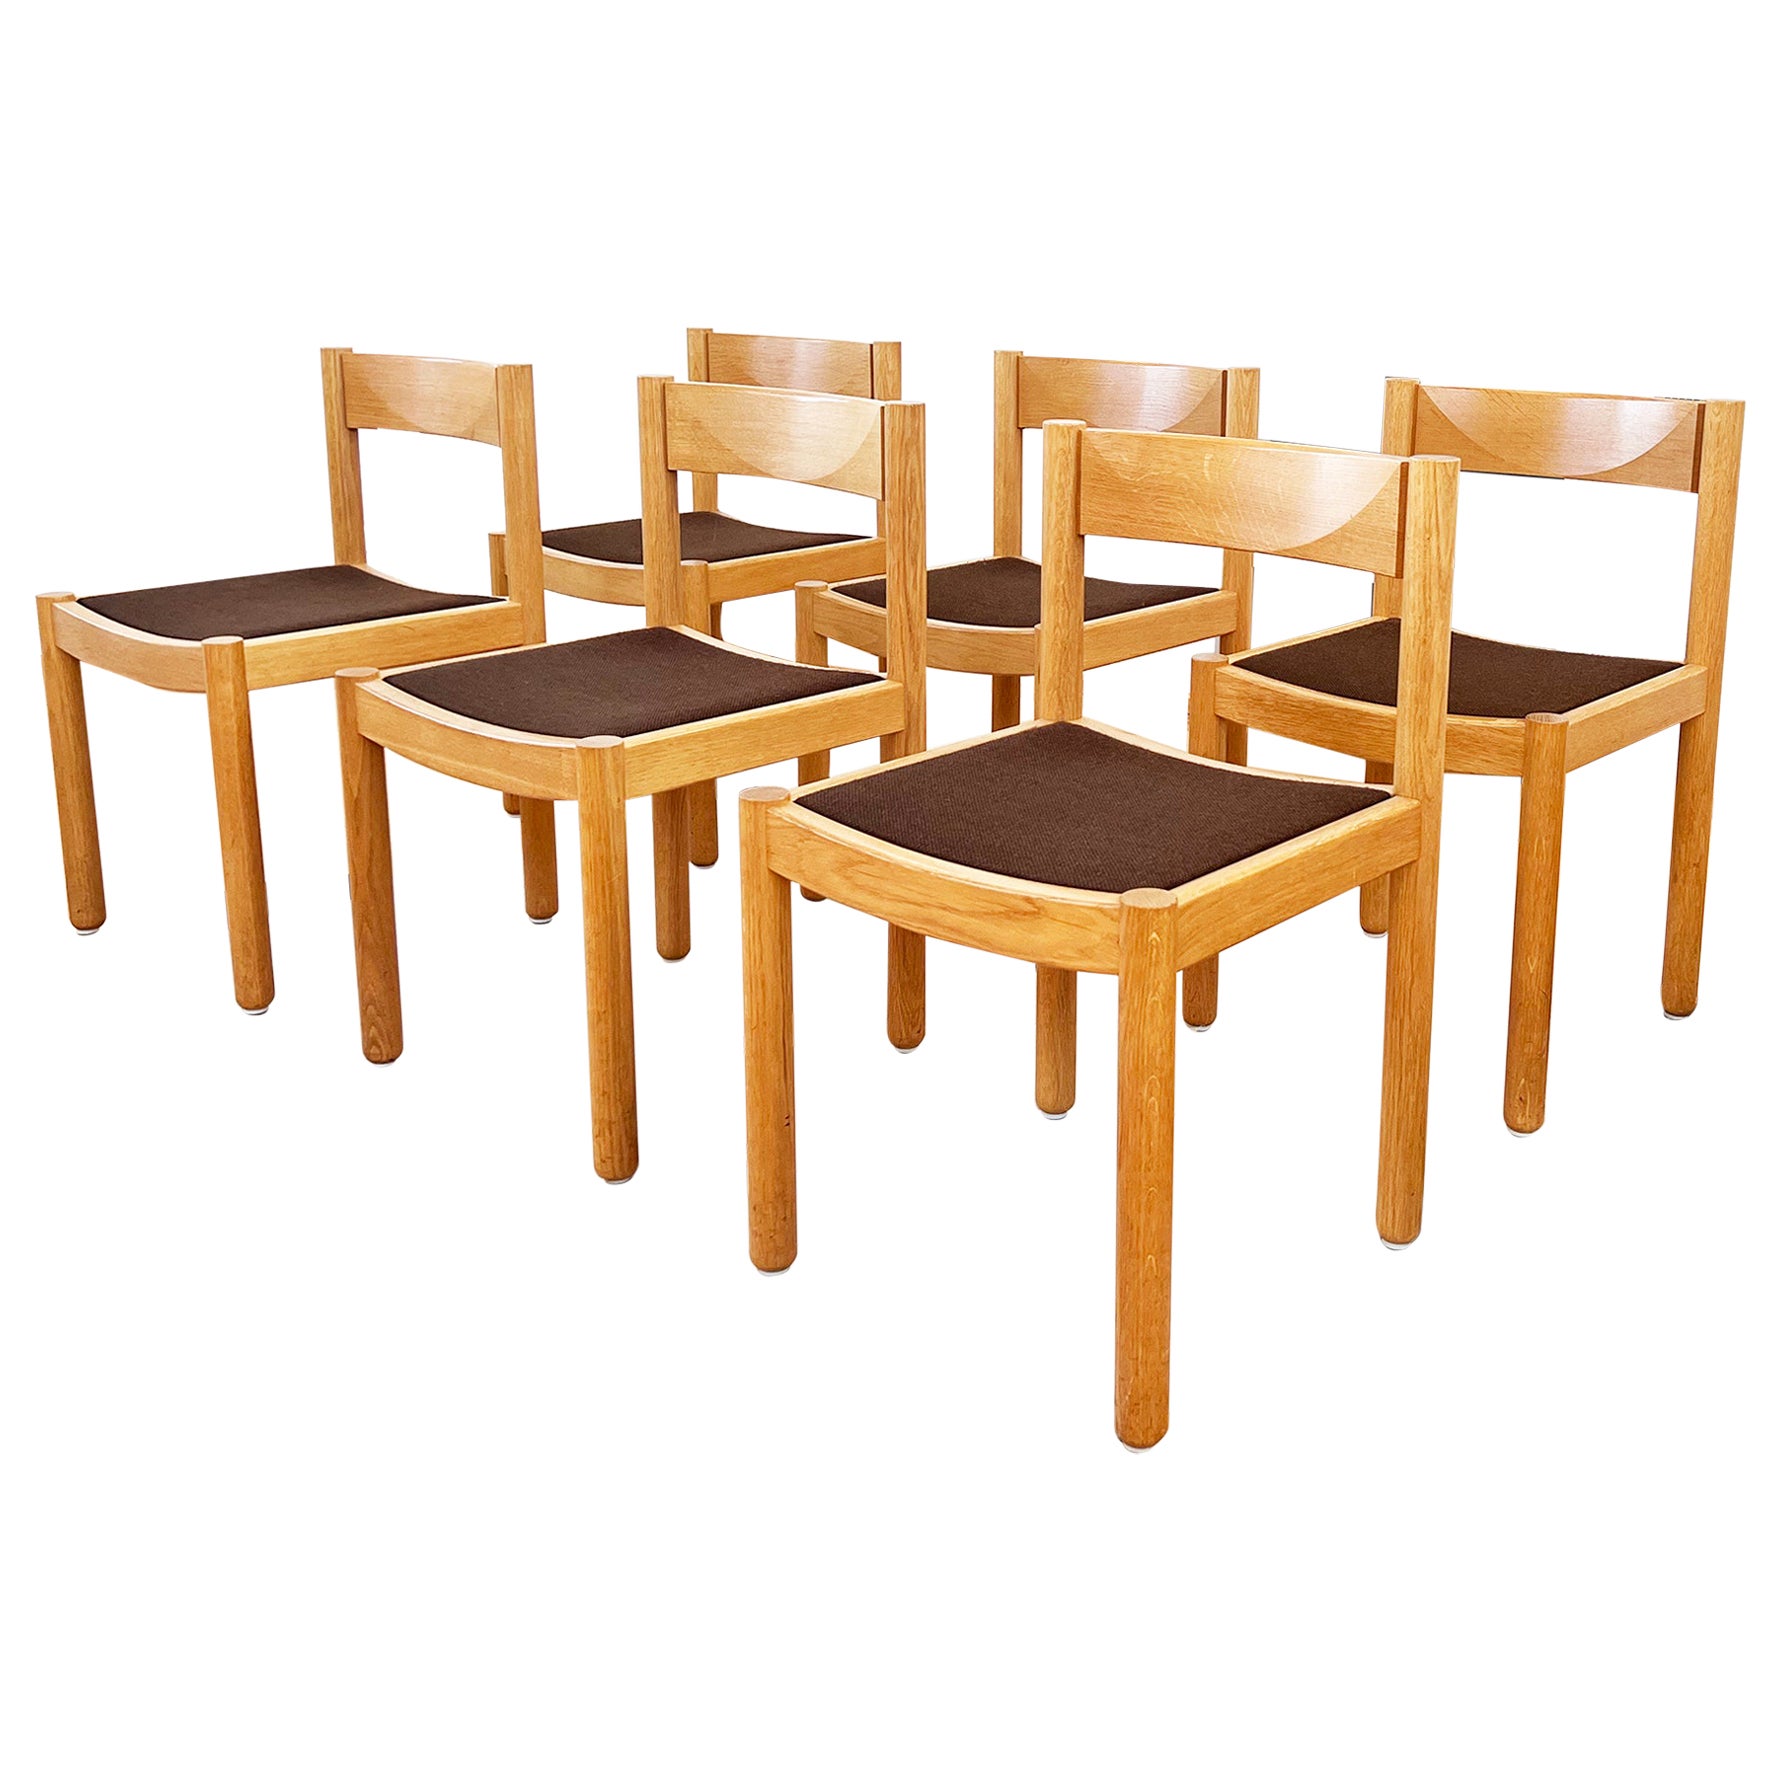 Robert and Trix Haussmann Oak Dining Chairs Midcentury 1963 Set of Six, 6 Piec For Sale